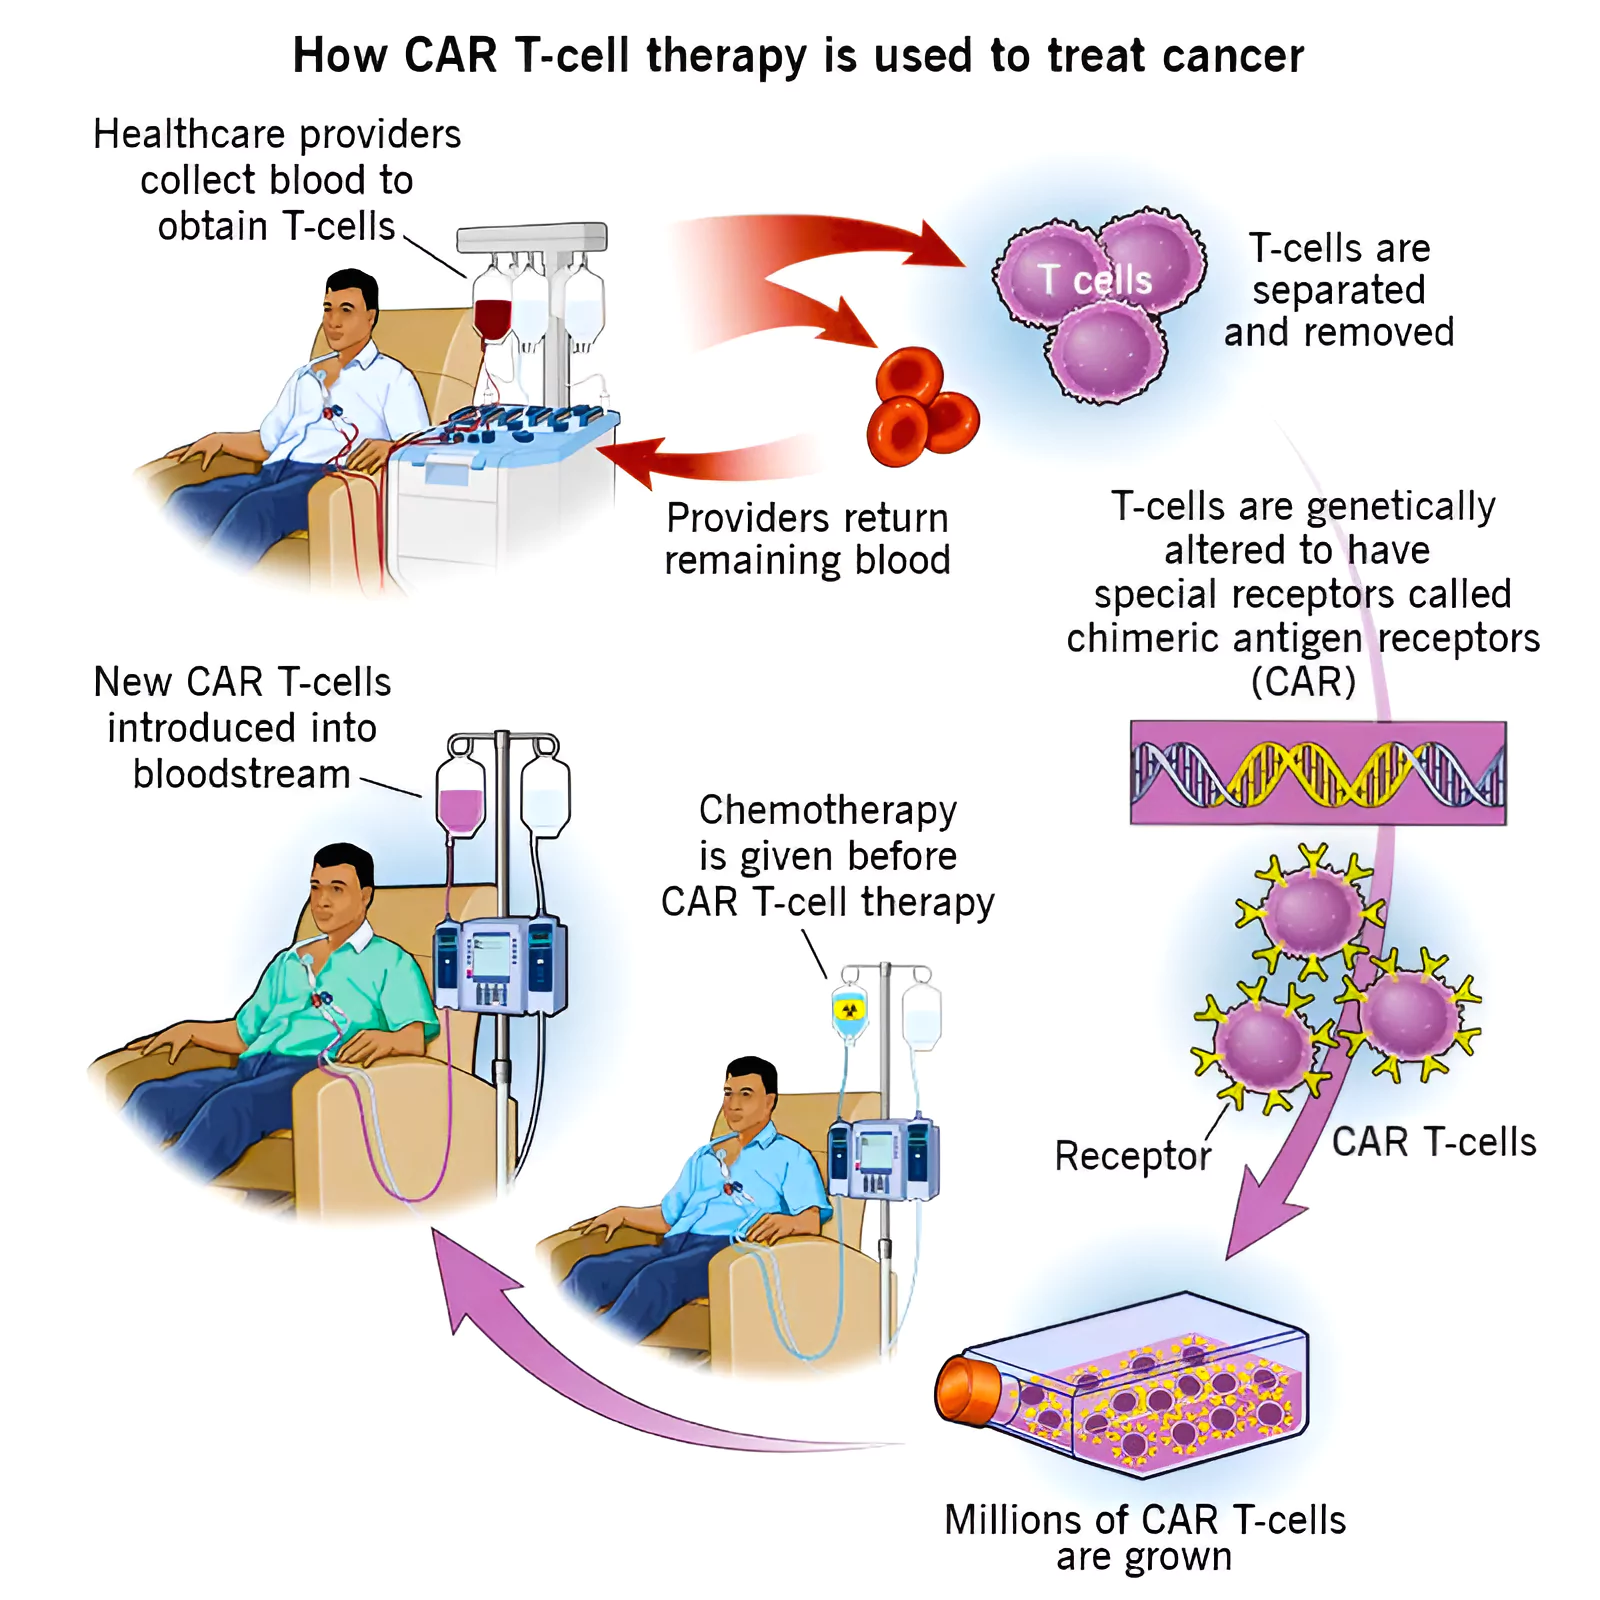 CAR-T cell therapy